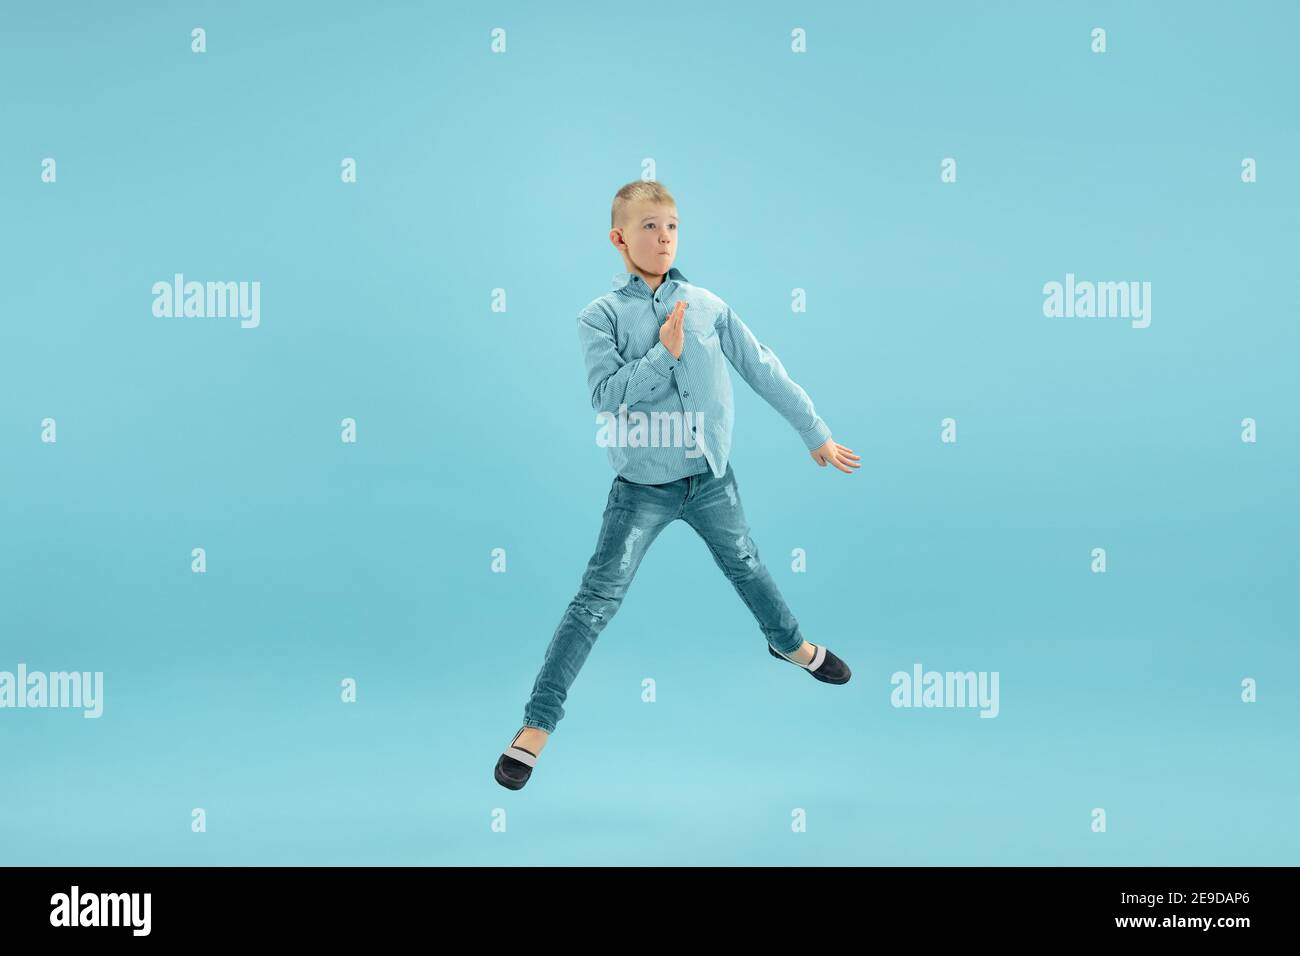 Jumping high. Childhood and dream about big and famous future. Pretty  little boy isolated on blue studio background. Childhood, dreams,  imagination, education, facial expression, emotions concept Stock Photo -  Alamy